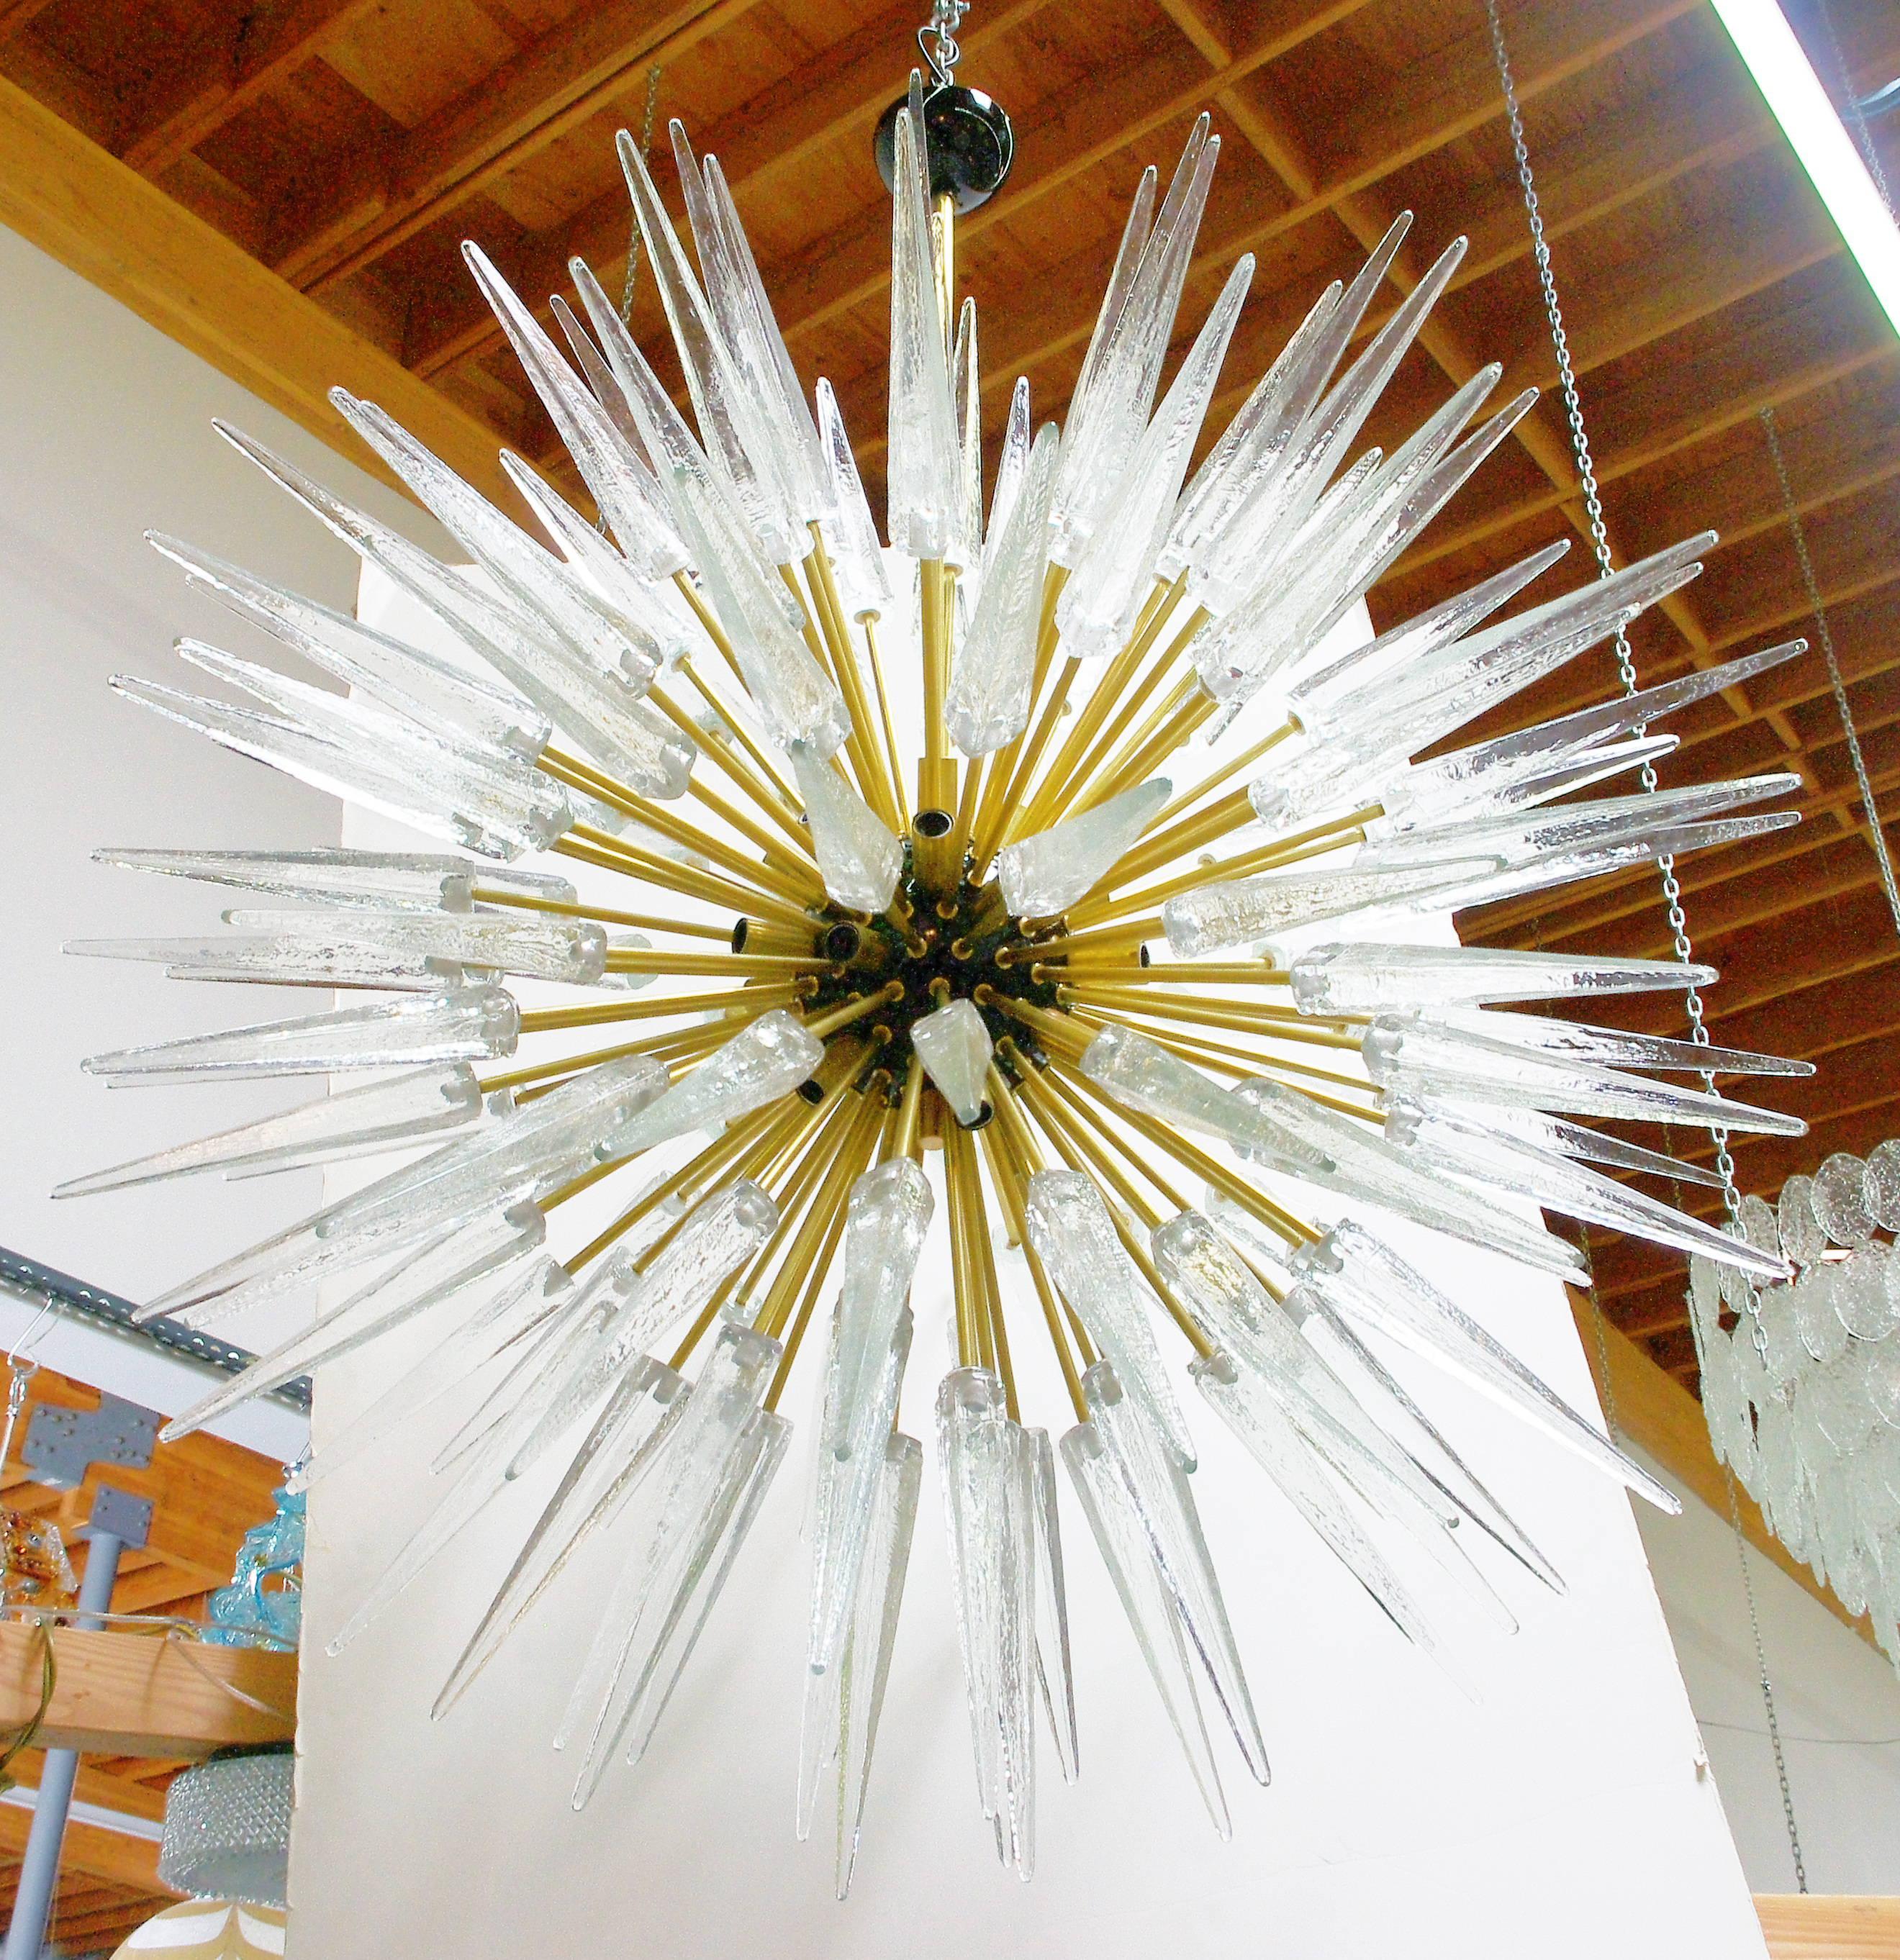 Italian modern sputnik chandelier with clear Murano glass shards spikes, mounted on natural unlacquered brass frame with black enameled centre, designed by Fabio Bergomi for Fabio Ltd / Made in Italy
16 lights / E12 or E14 type / Max 40W